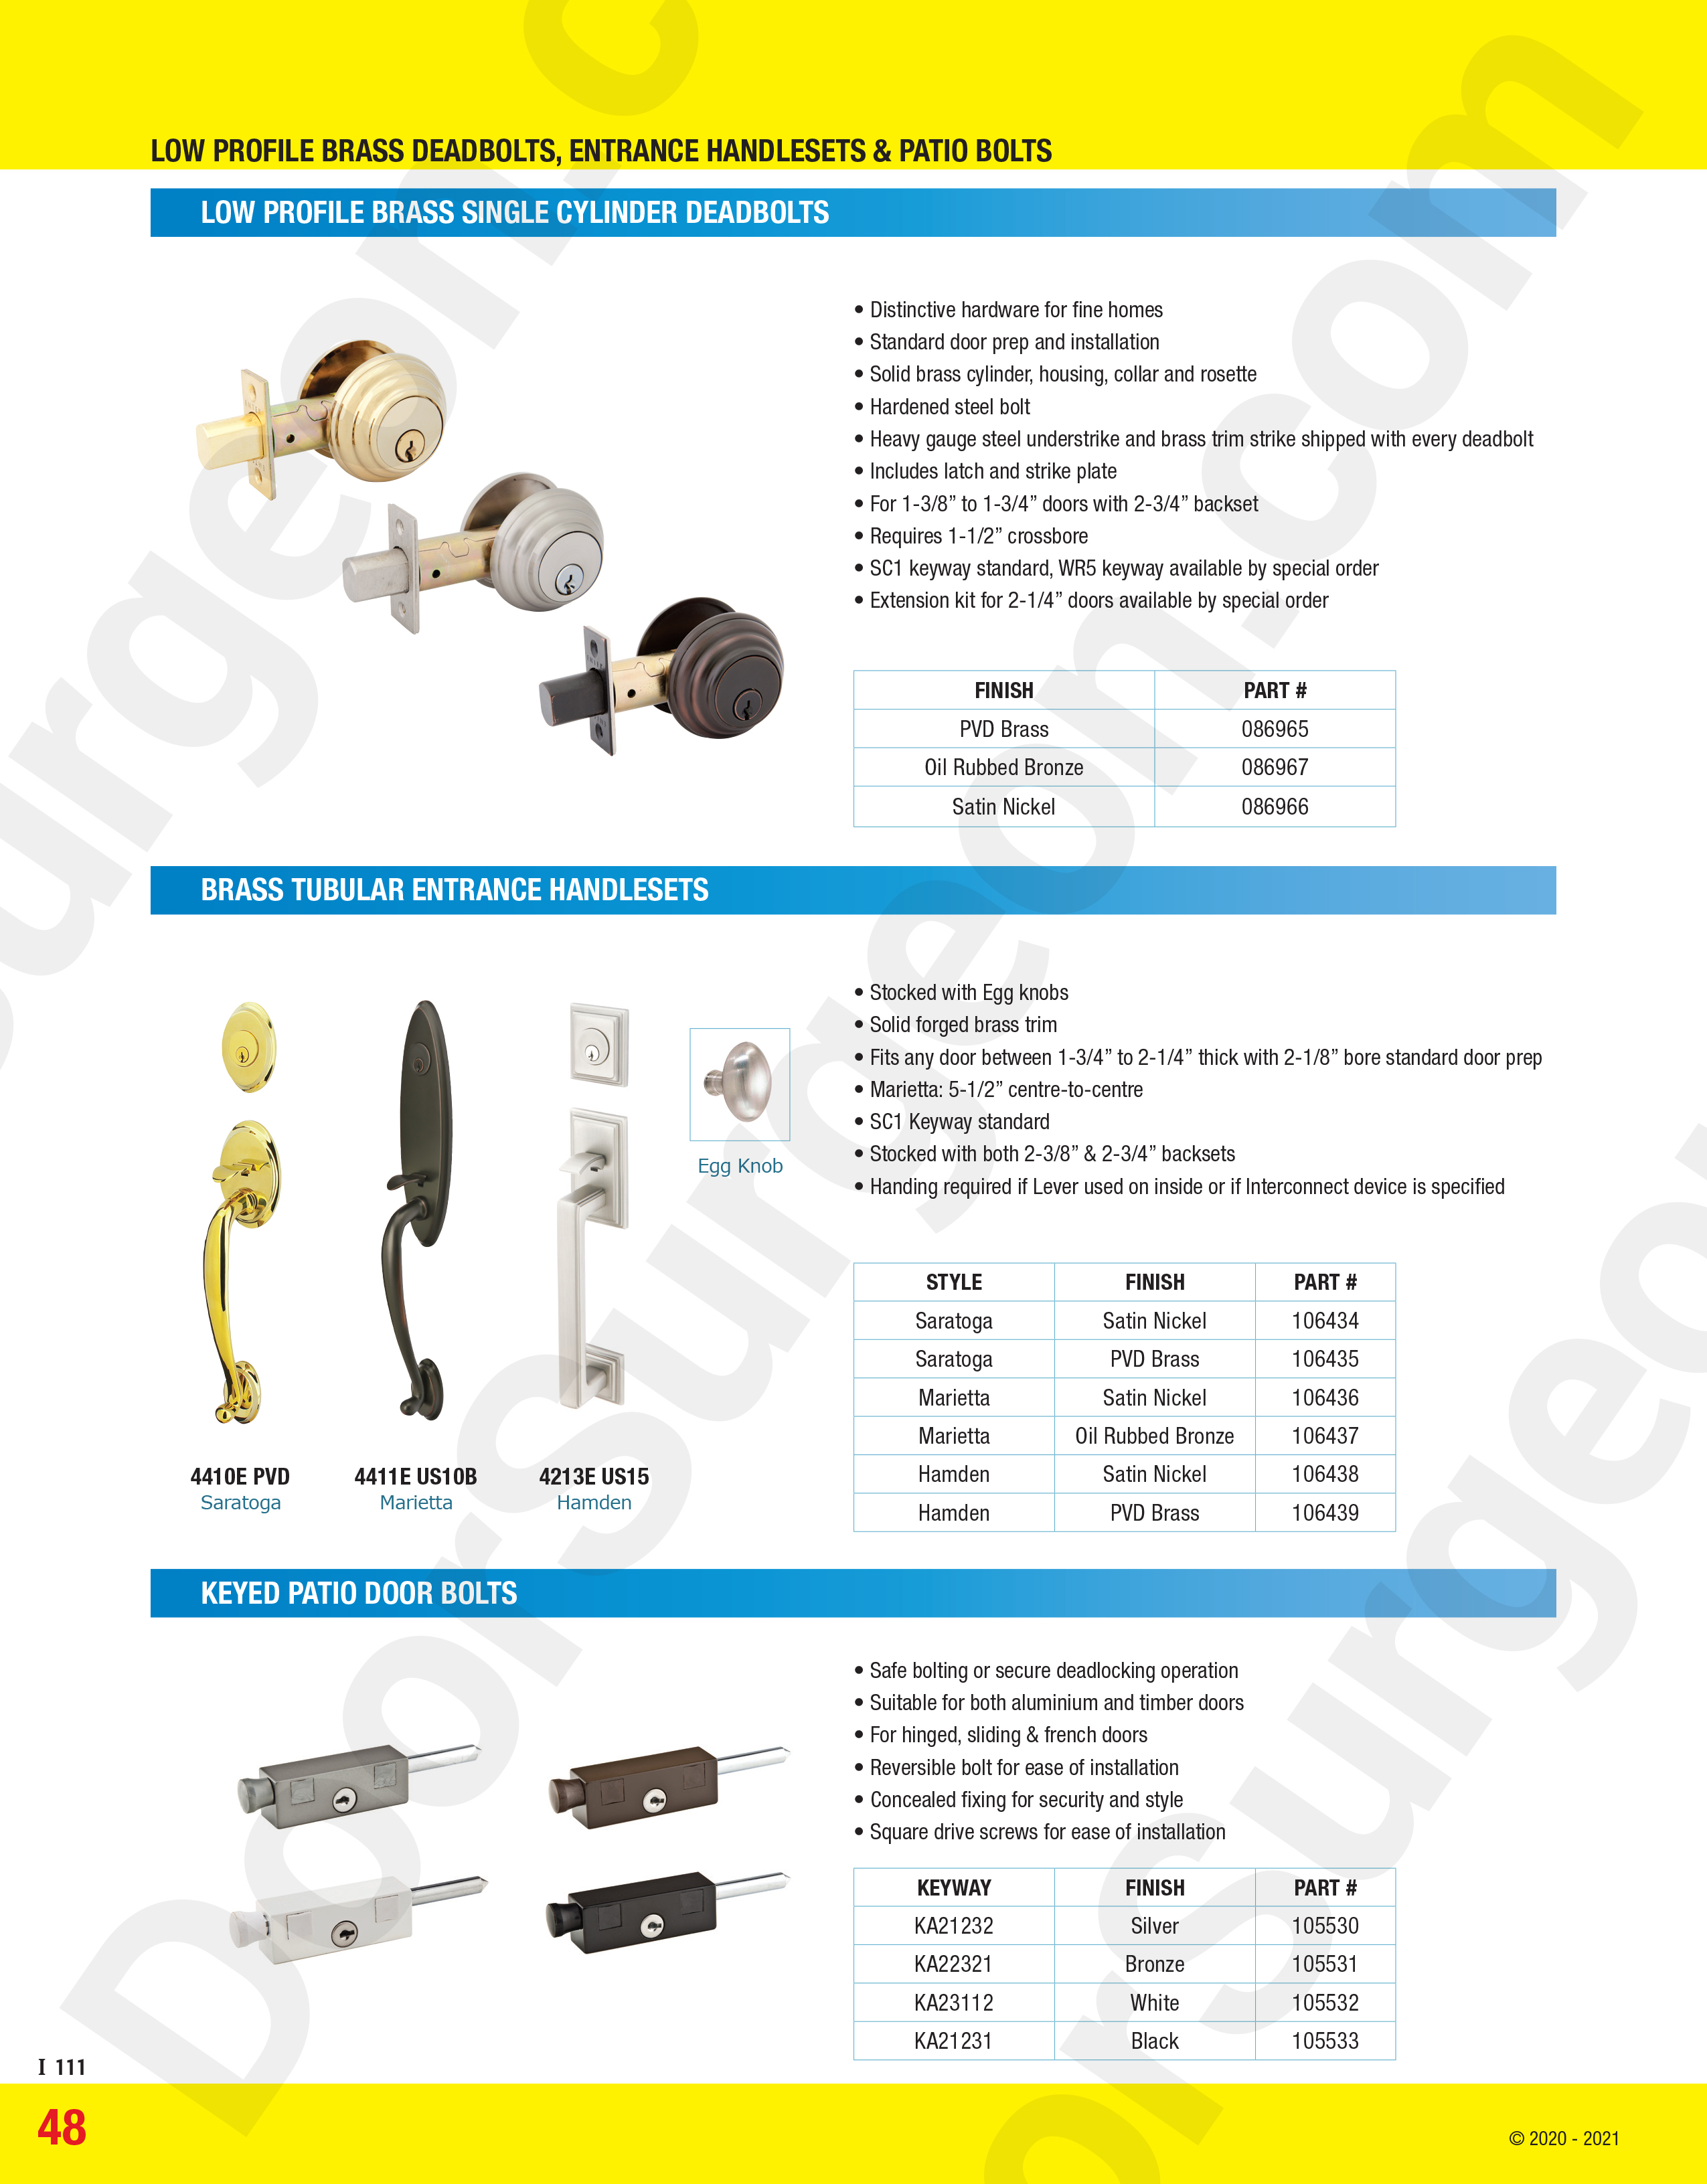 Schlage deadbolts and handles. Secondary locking Patio pins to lock down patio doors.